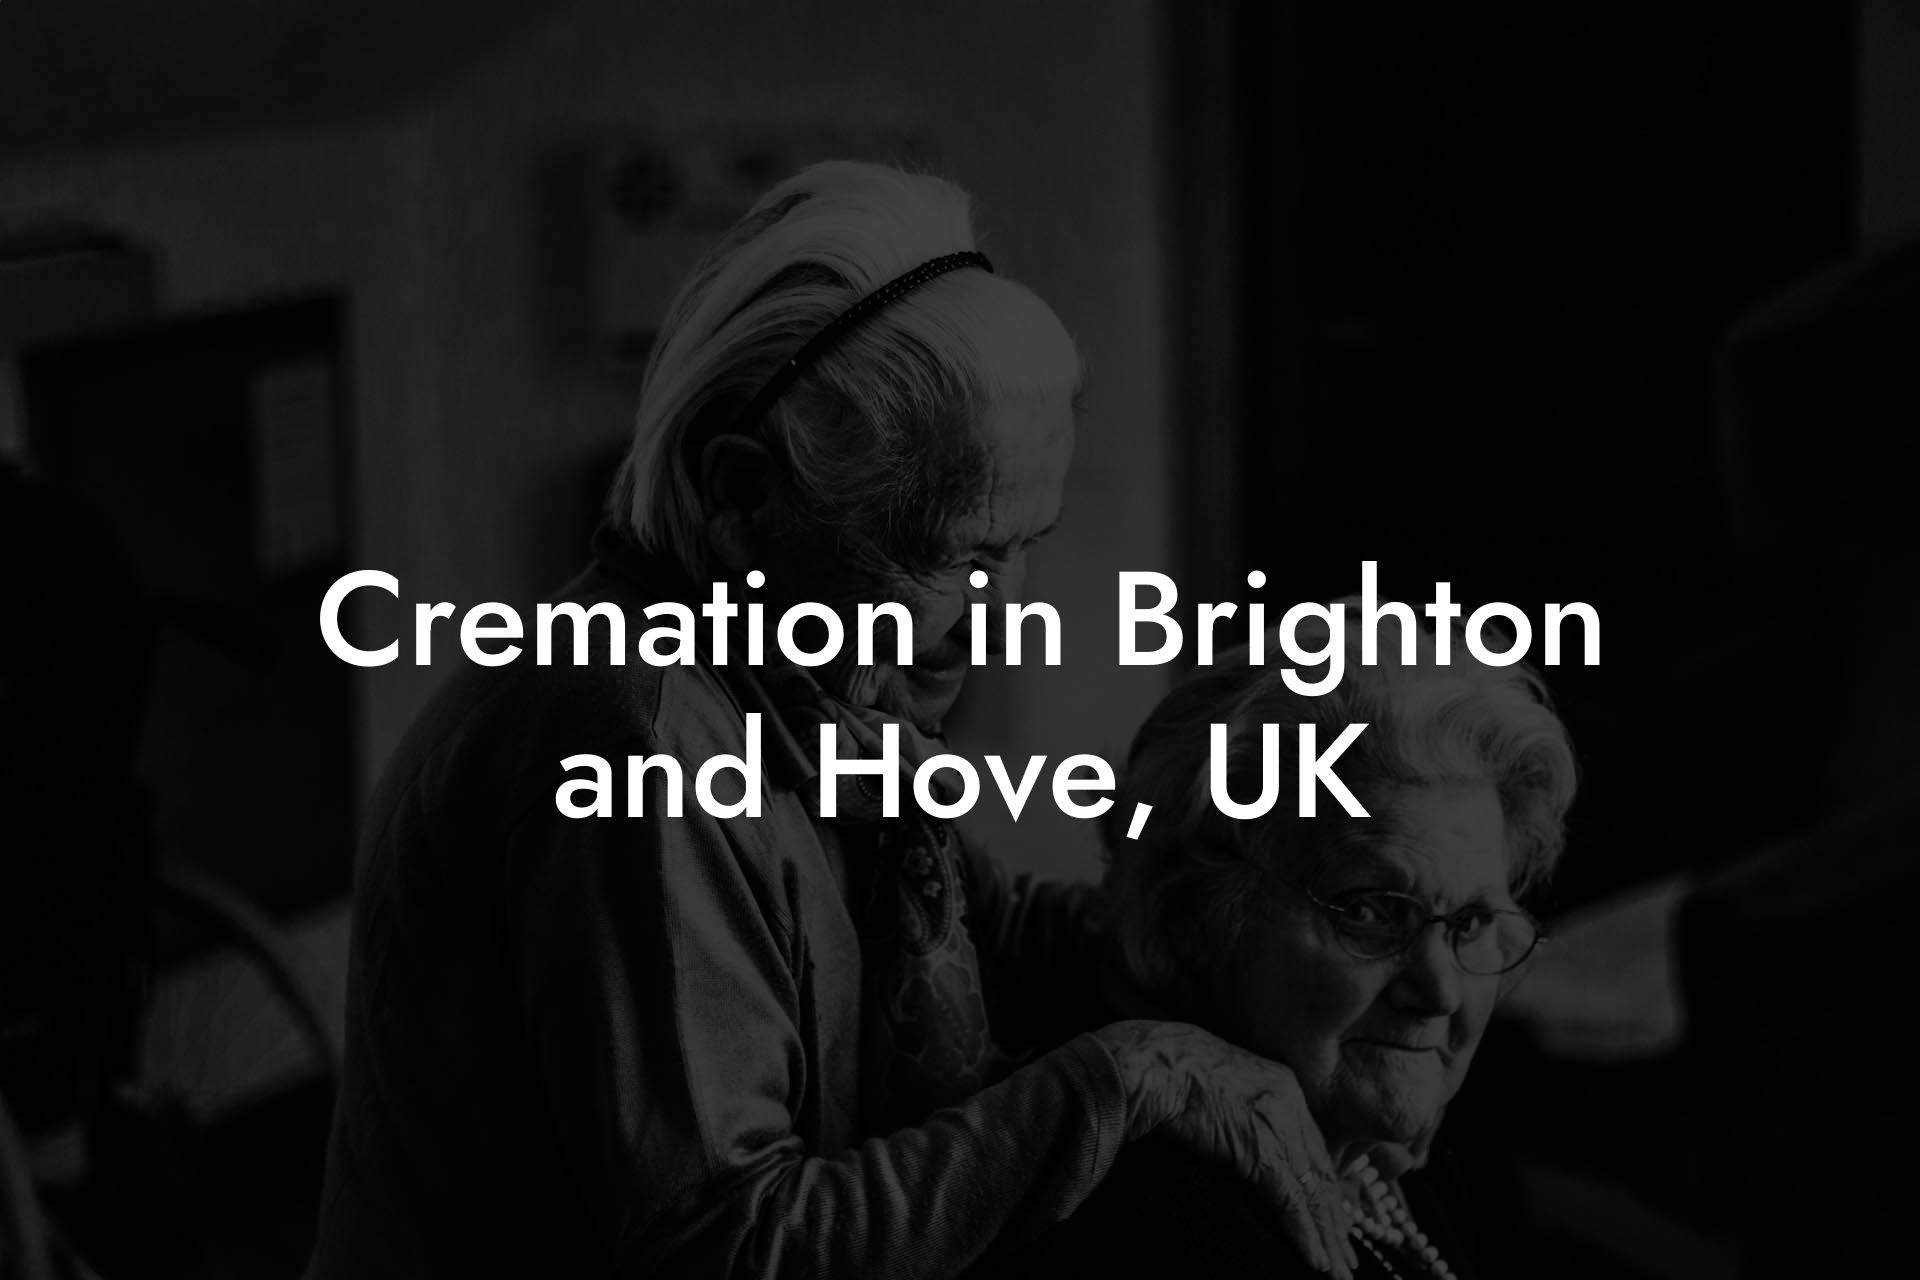 Cremation in Brighton and Hove, UK